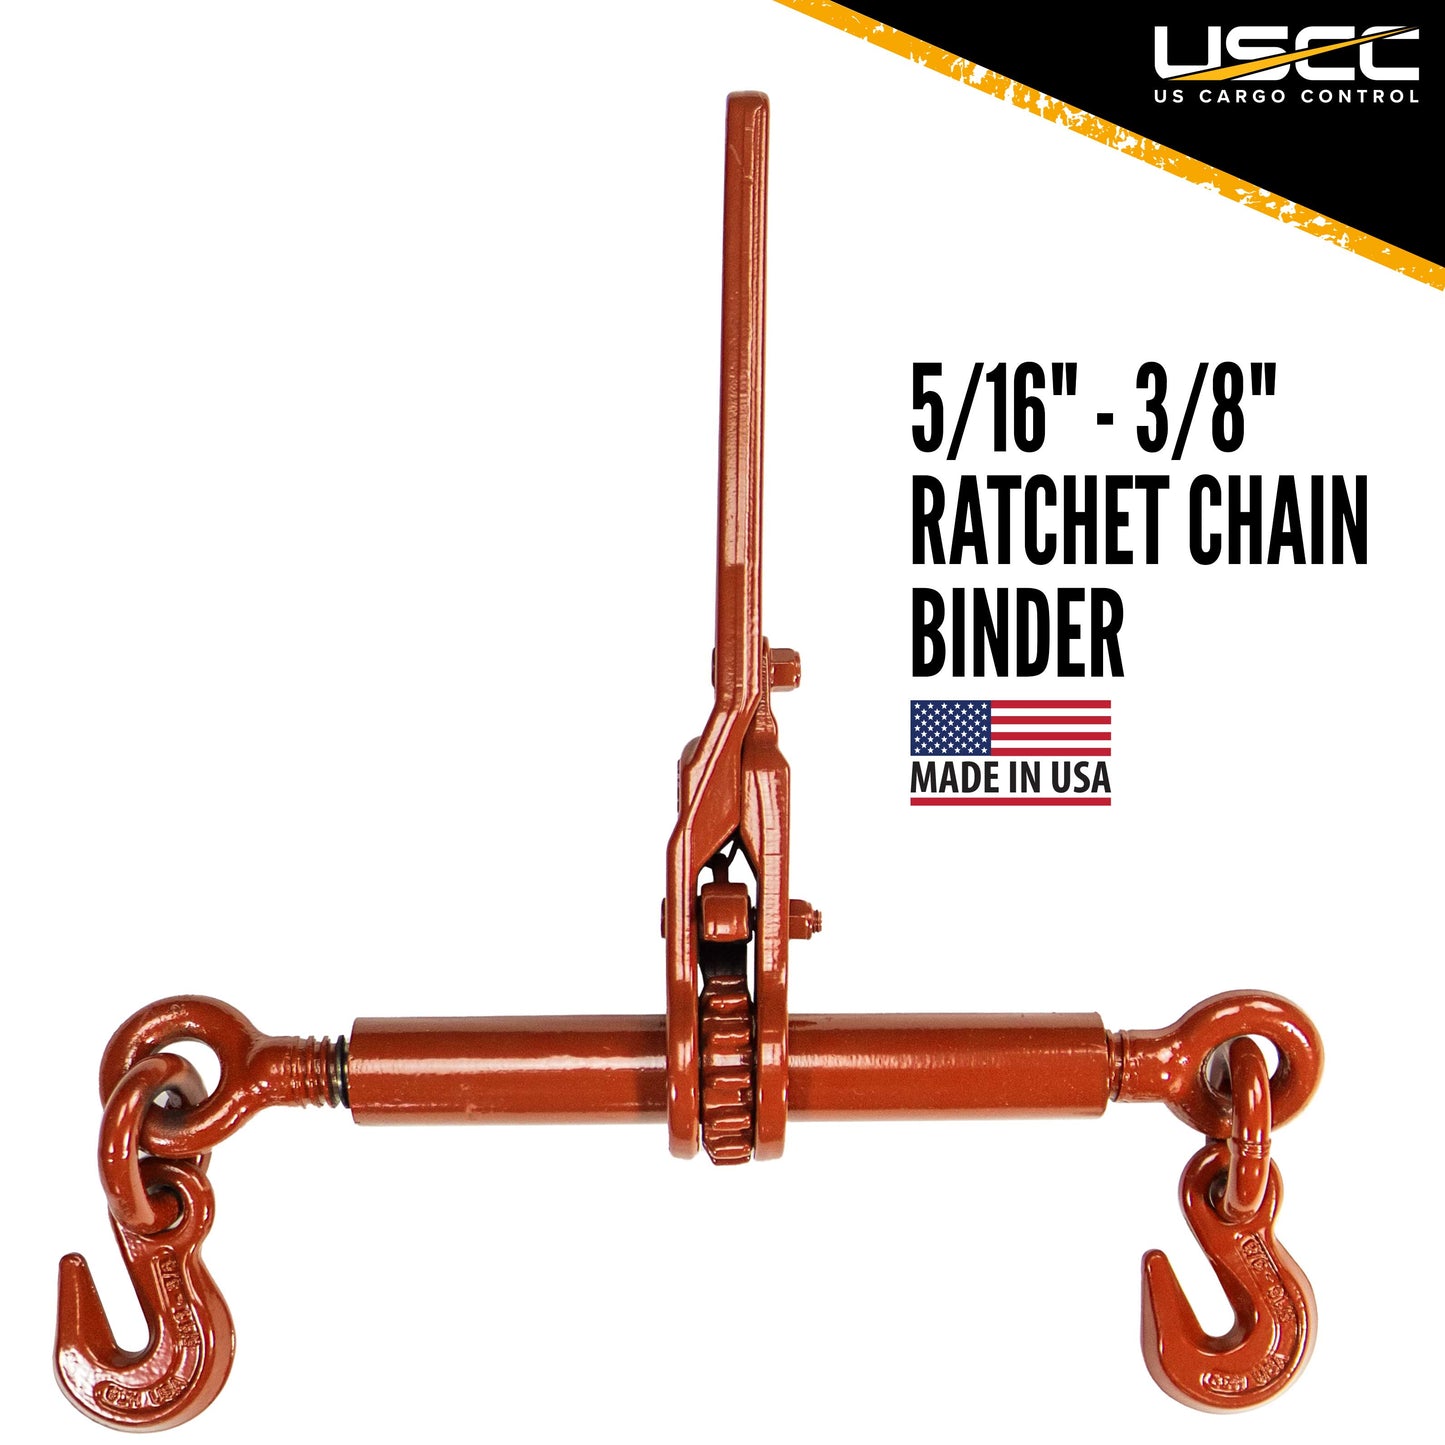 Grade 70 516 inch x 20 foot Chain Ratchet Chain Binder Made in USA Package image 2 of 9